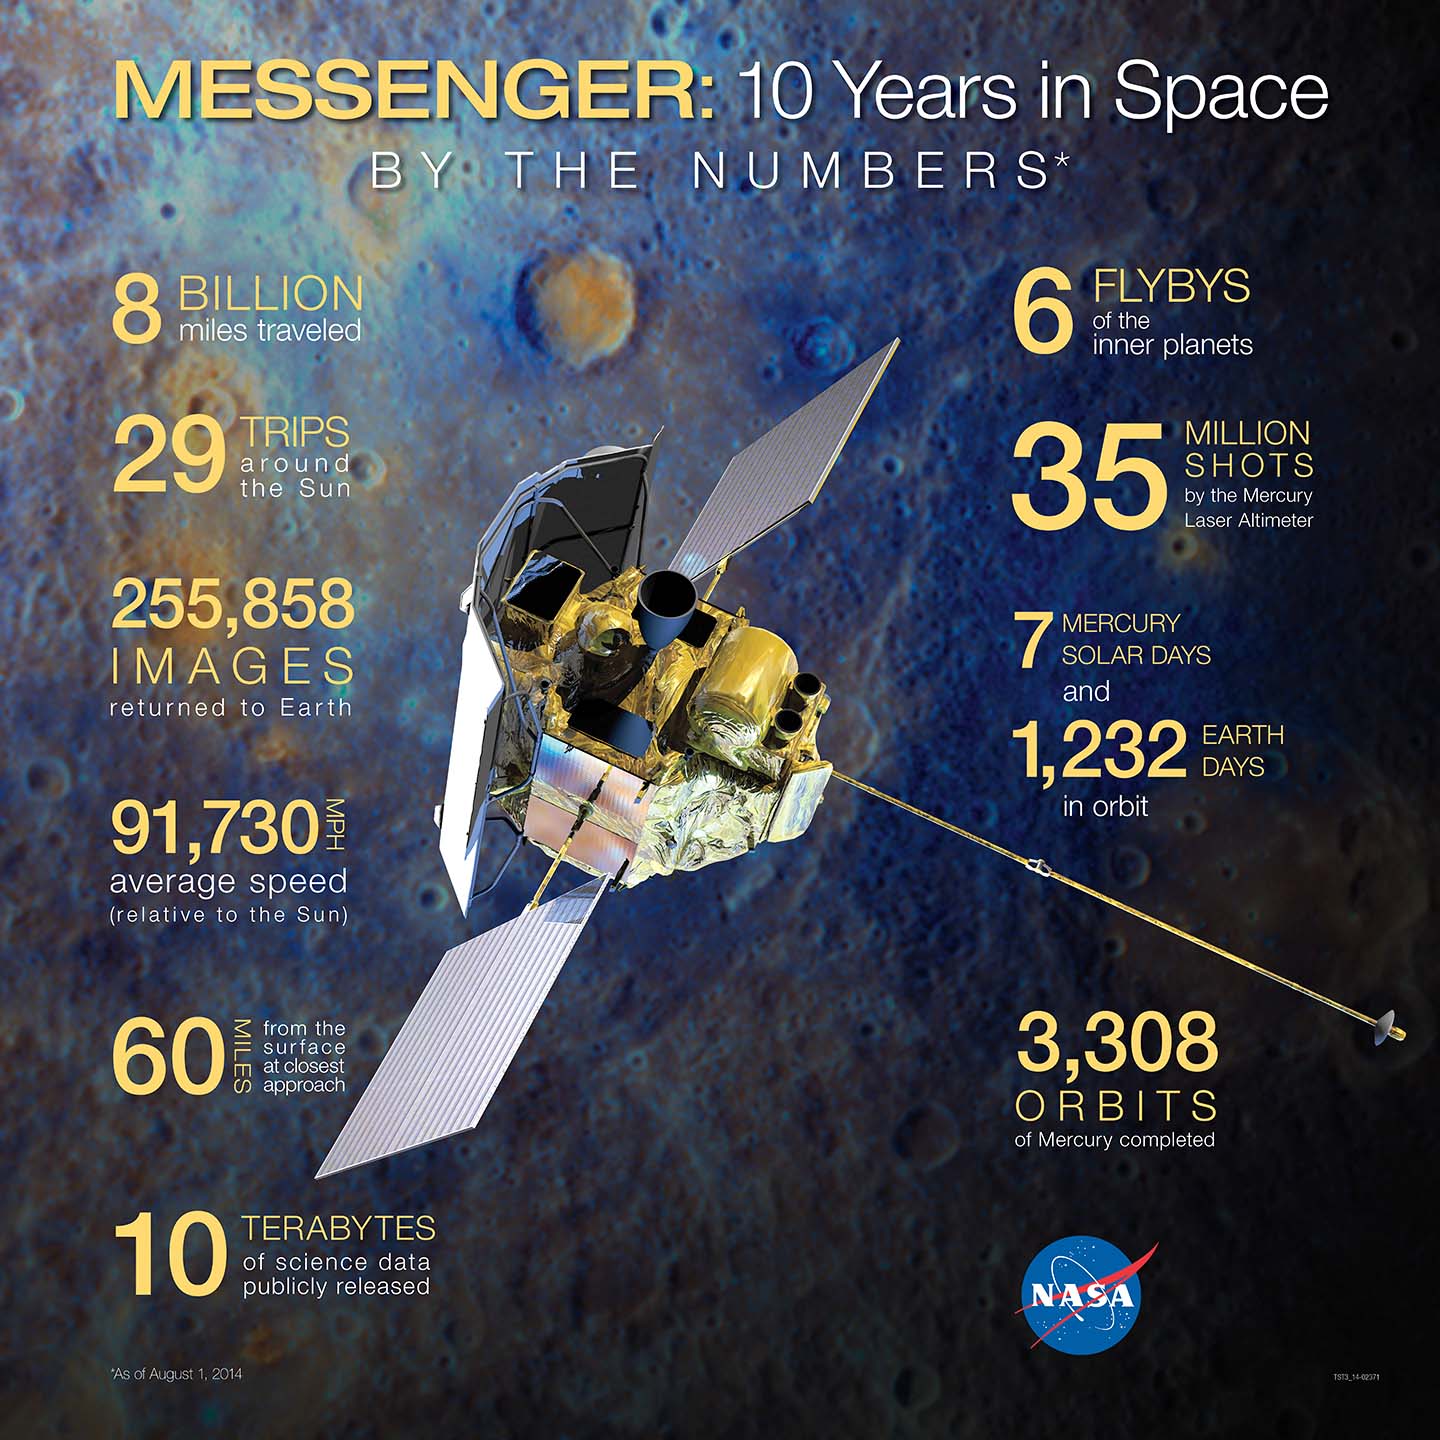 MESSENGER: 10 Years in Space